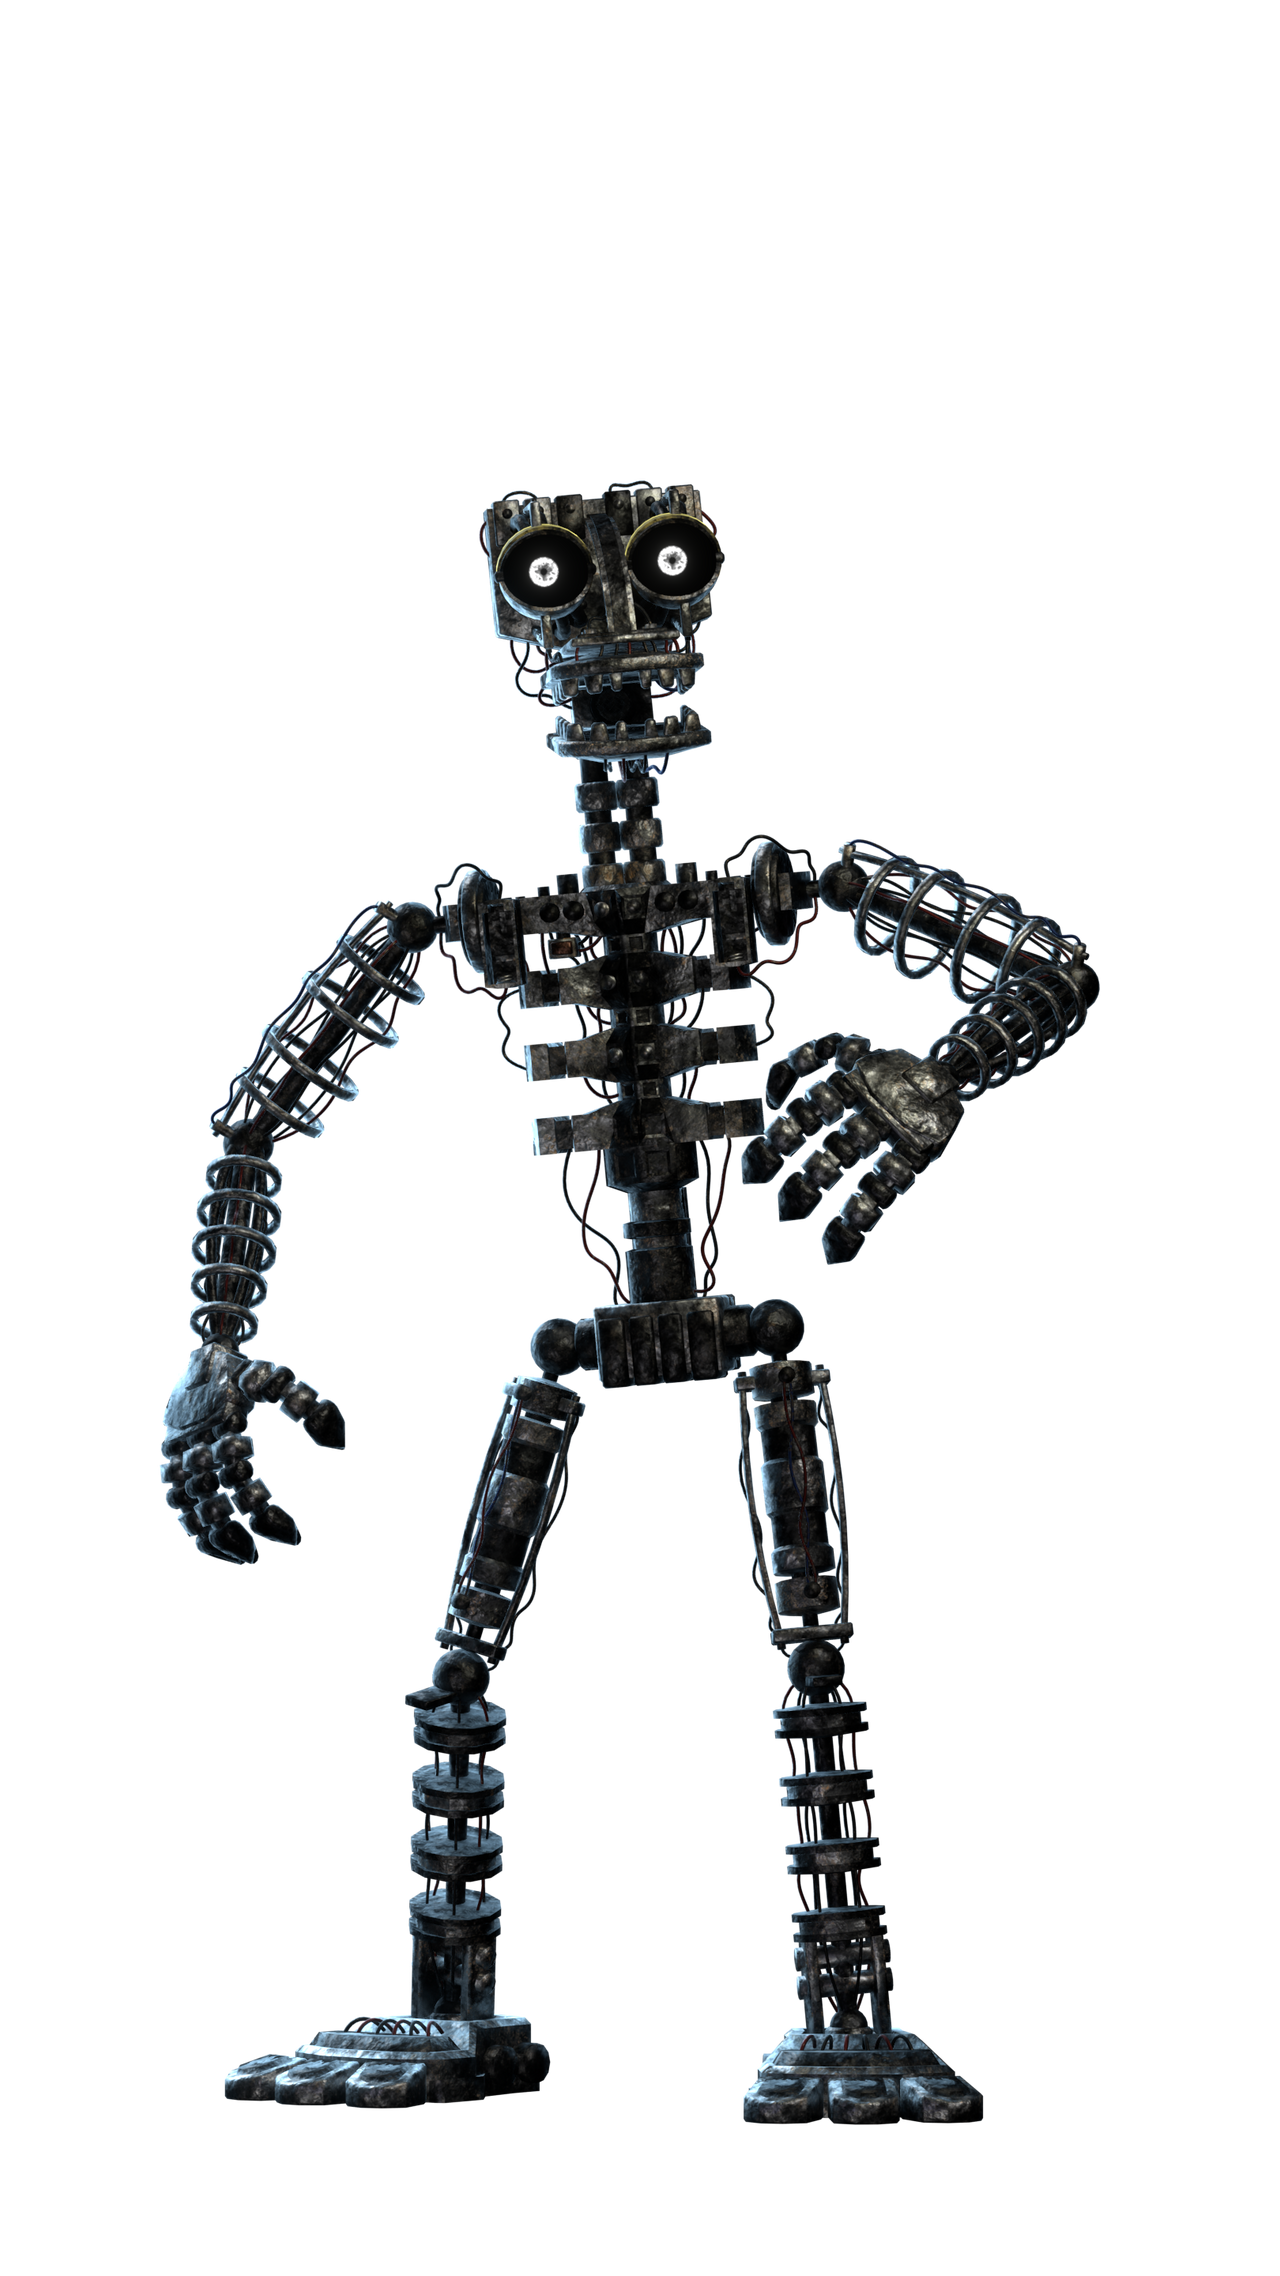 Withered Chica by Freddydoom5 on DeviantArt